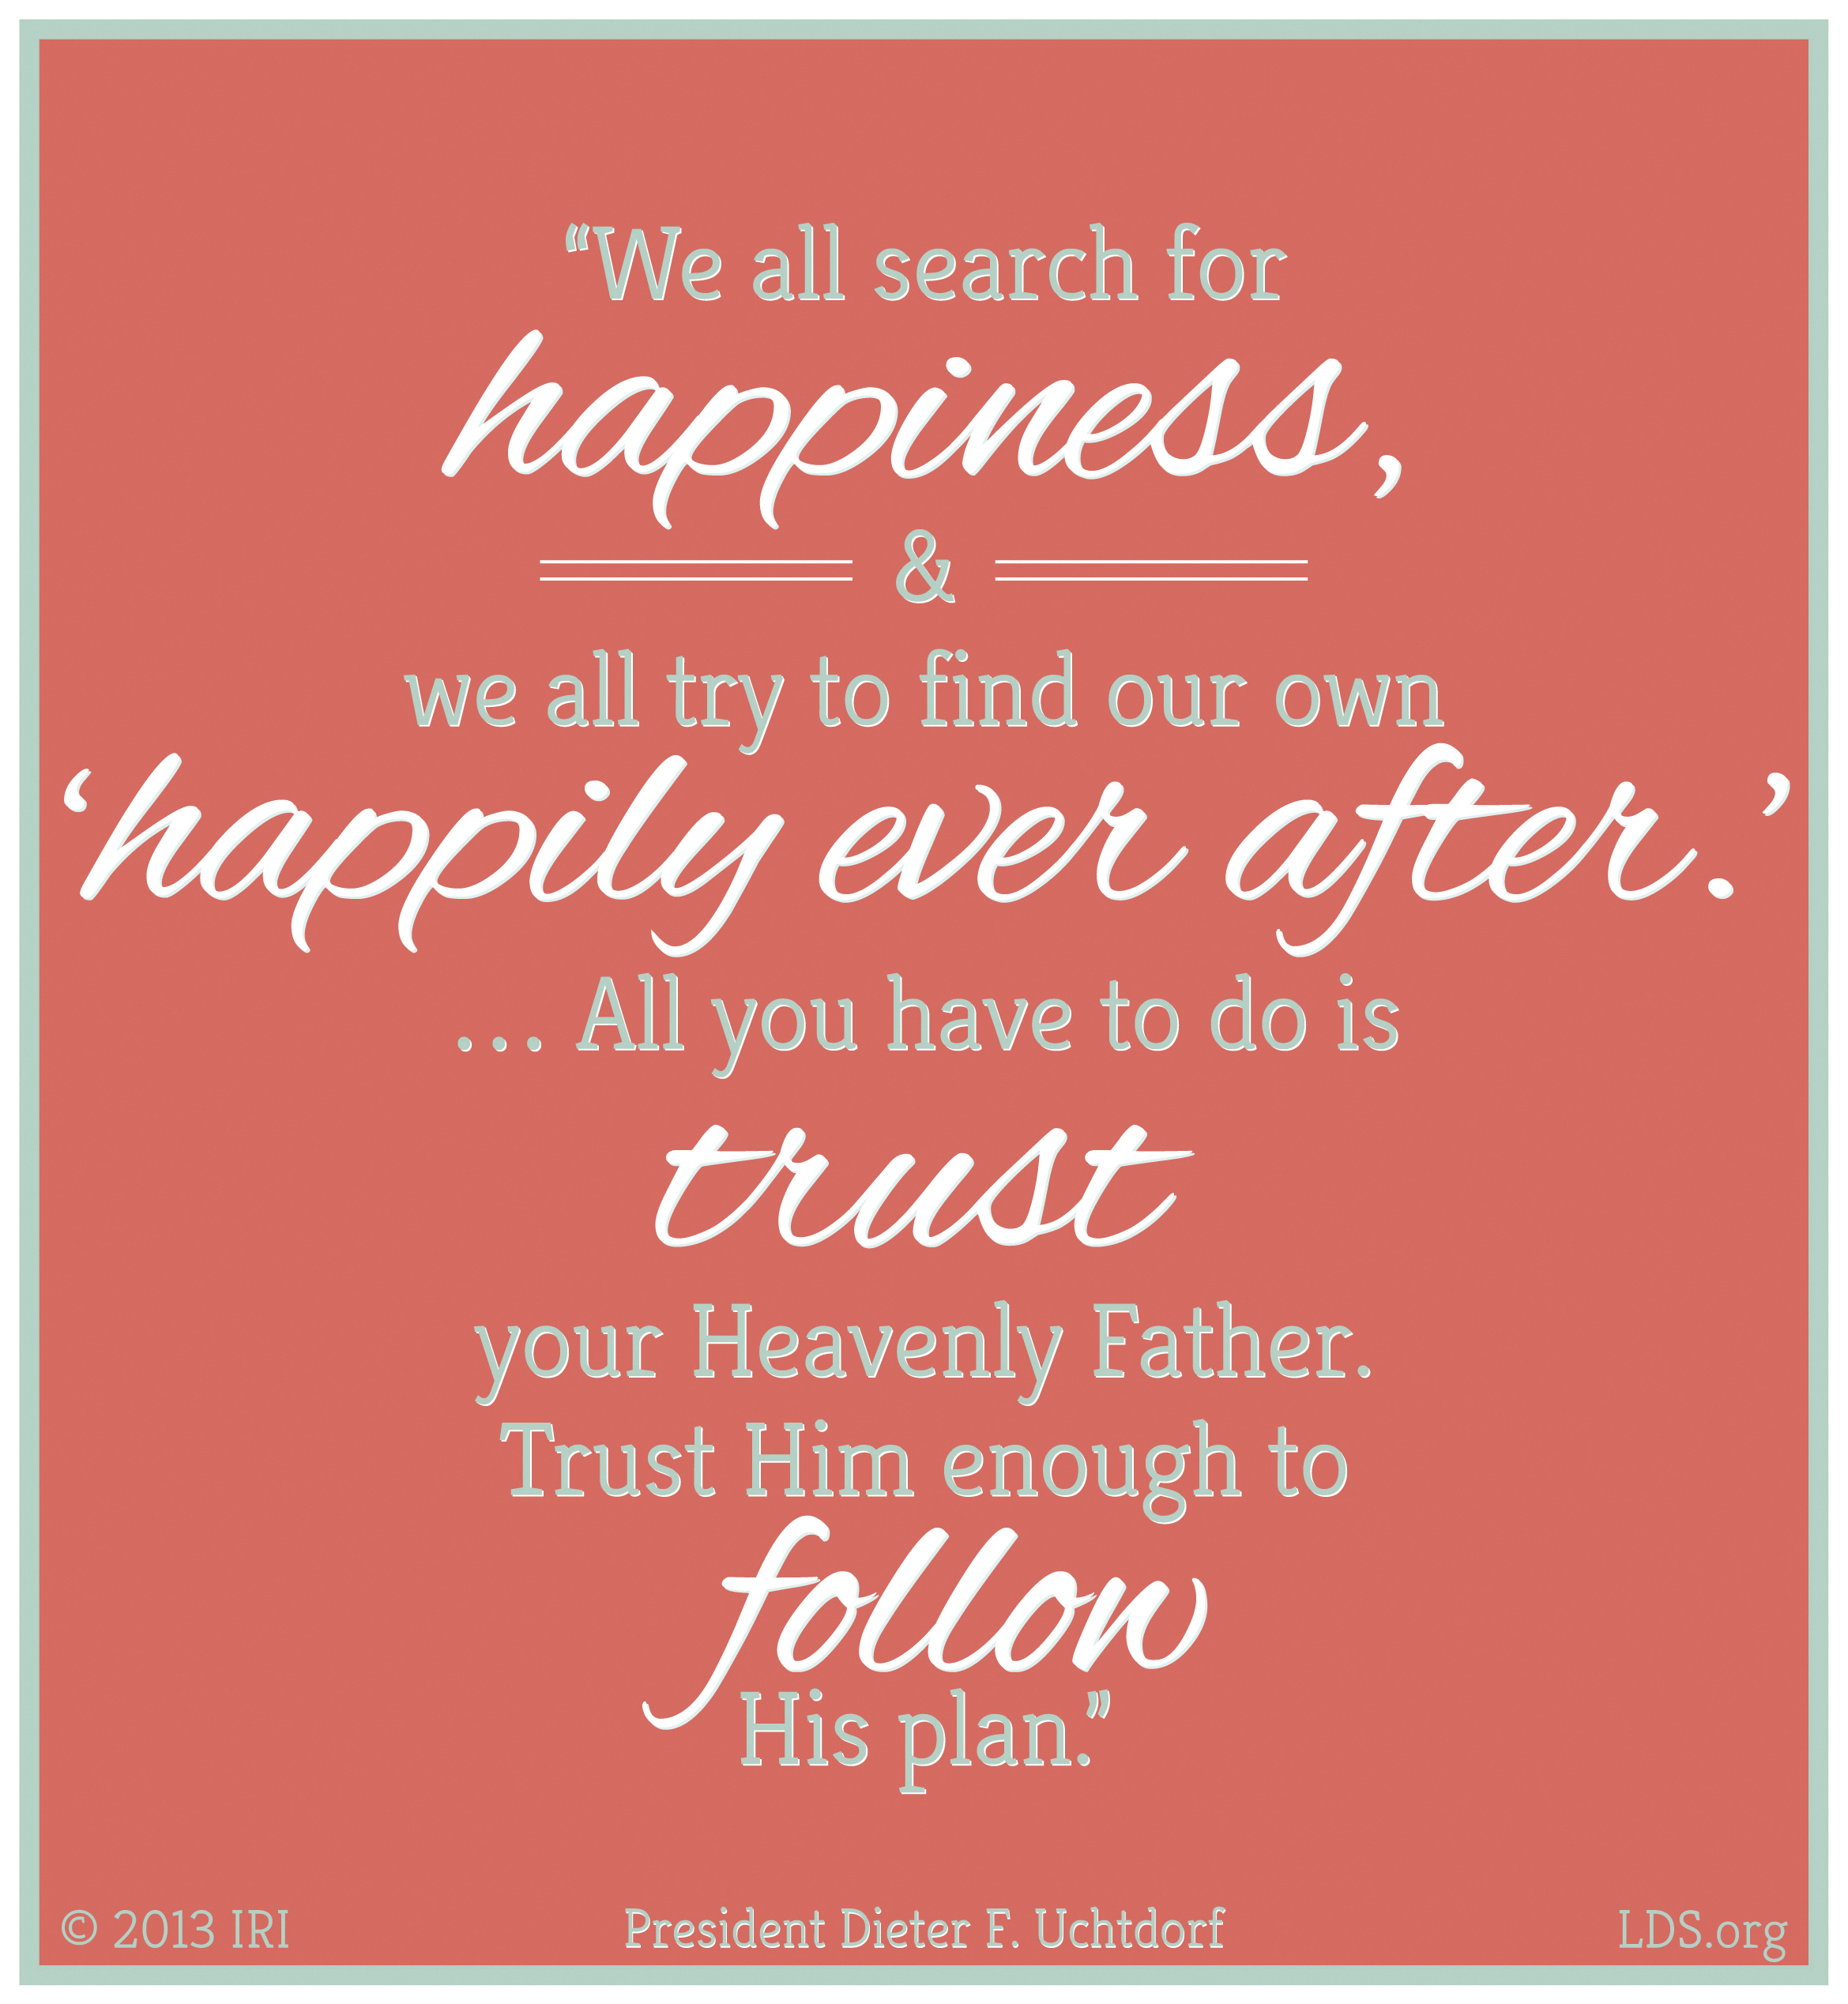 “We all search for happiness, and we all try to find our own ‘happily ever after.’ … All you have to do is trust your Heavenly Father. Trust Him enough to follow His plan.”—President Dieter F. Uchtdorf, “Your Happily Ever After”